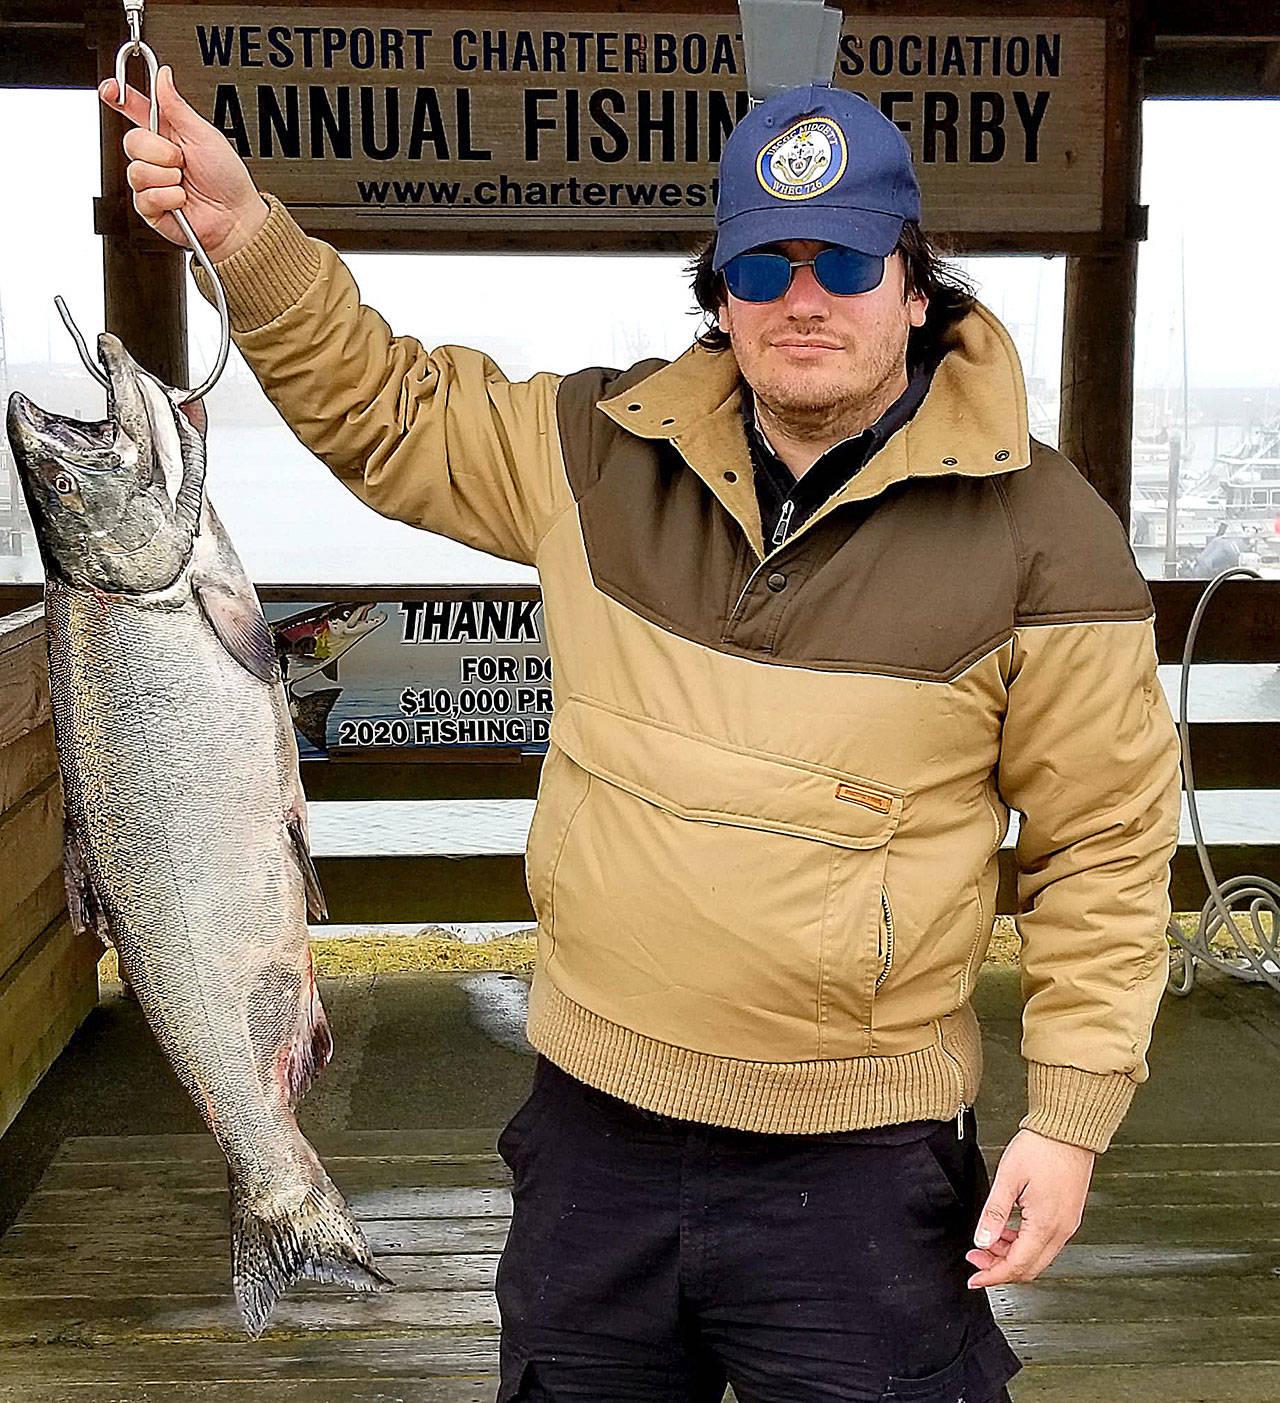 Ward B. Johnson of Rohnert Park, California, won the daily Westport Charterboat Association derby Aug. 3 with this 16.95-pound Chinook. Salmon fishing out of Westport goes to seven days a week starting Friday. (Courtesy Westport Weighmaster)